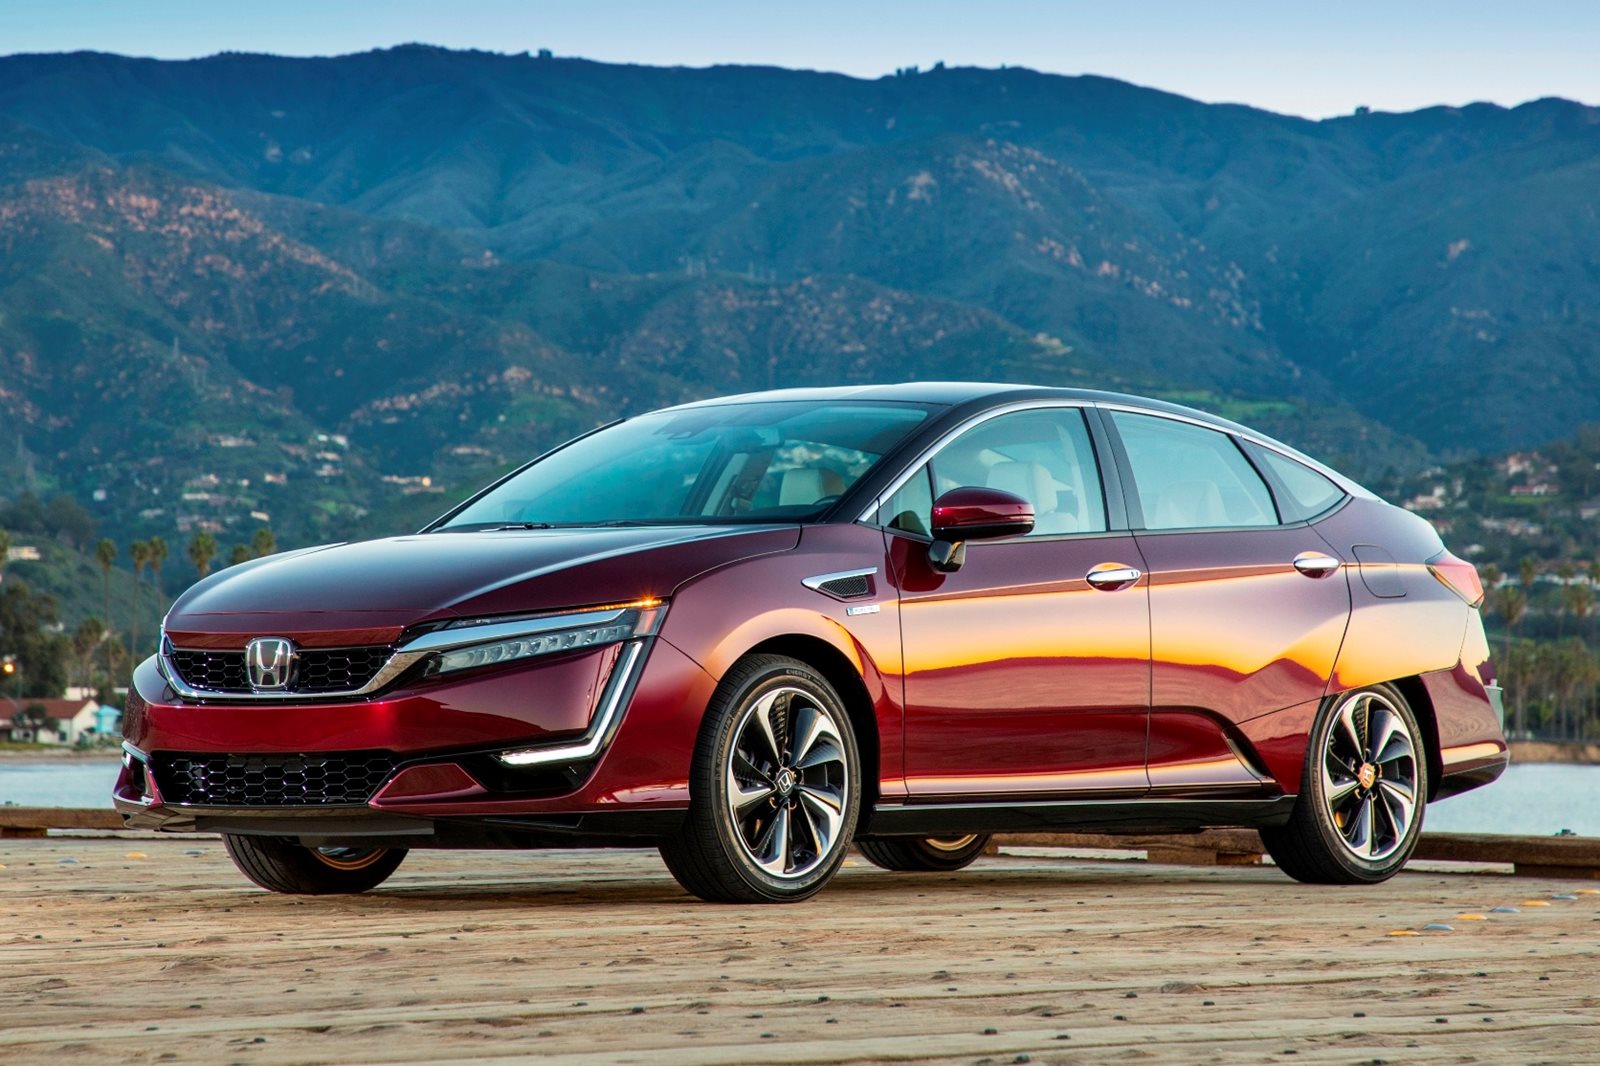 2018 Honda Clarity Fuel Cell: Review, Trims, Specs, Price, New Interior